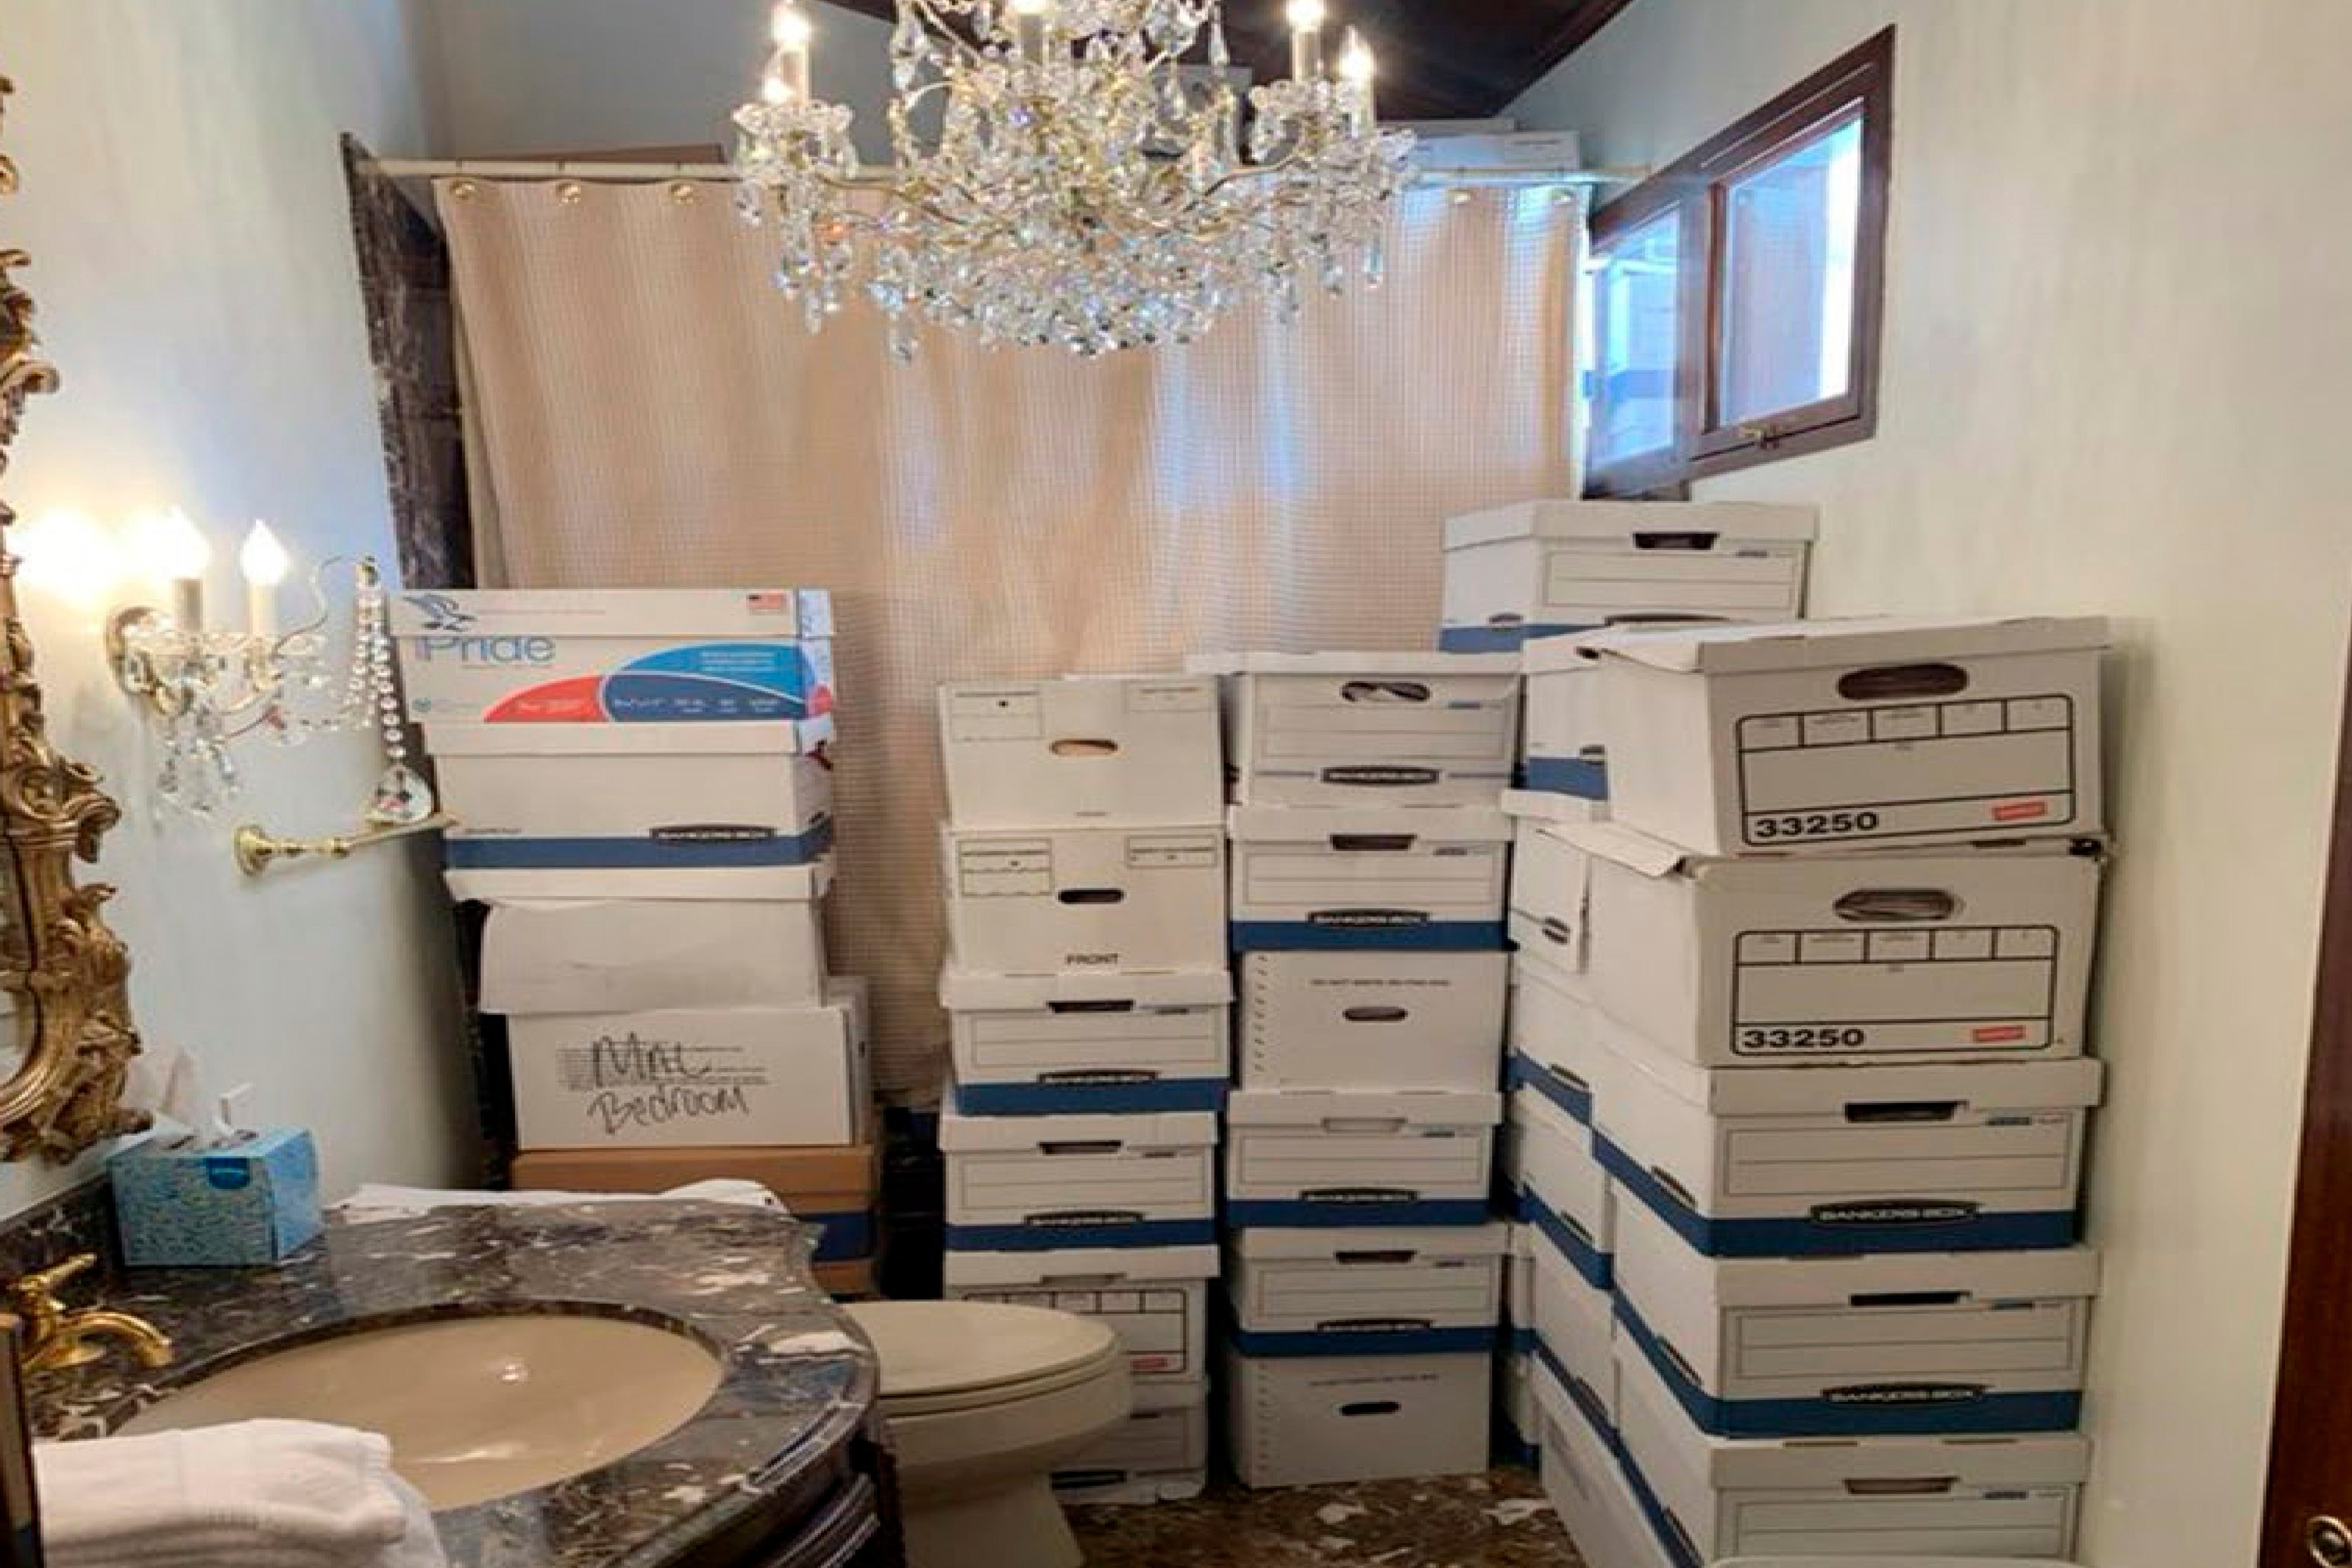 Boxes containing classified documents in a bathroom in Mar-a-Lago